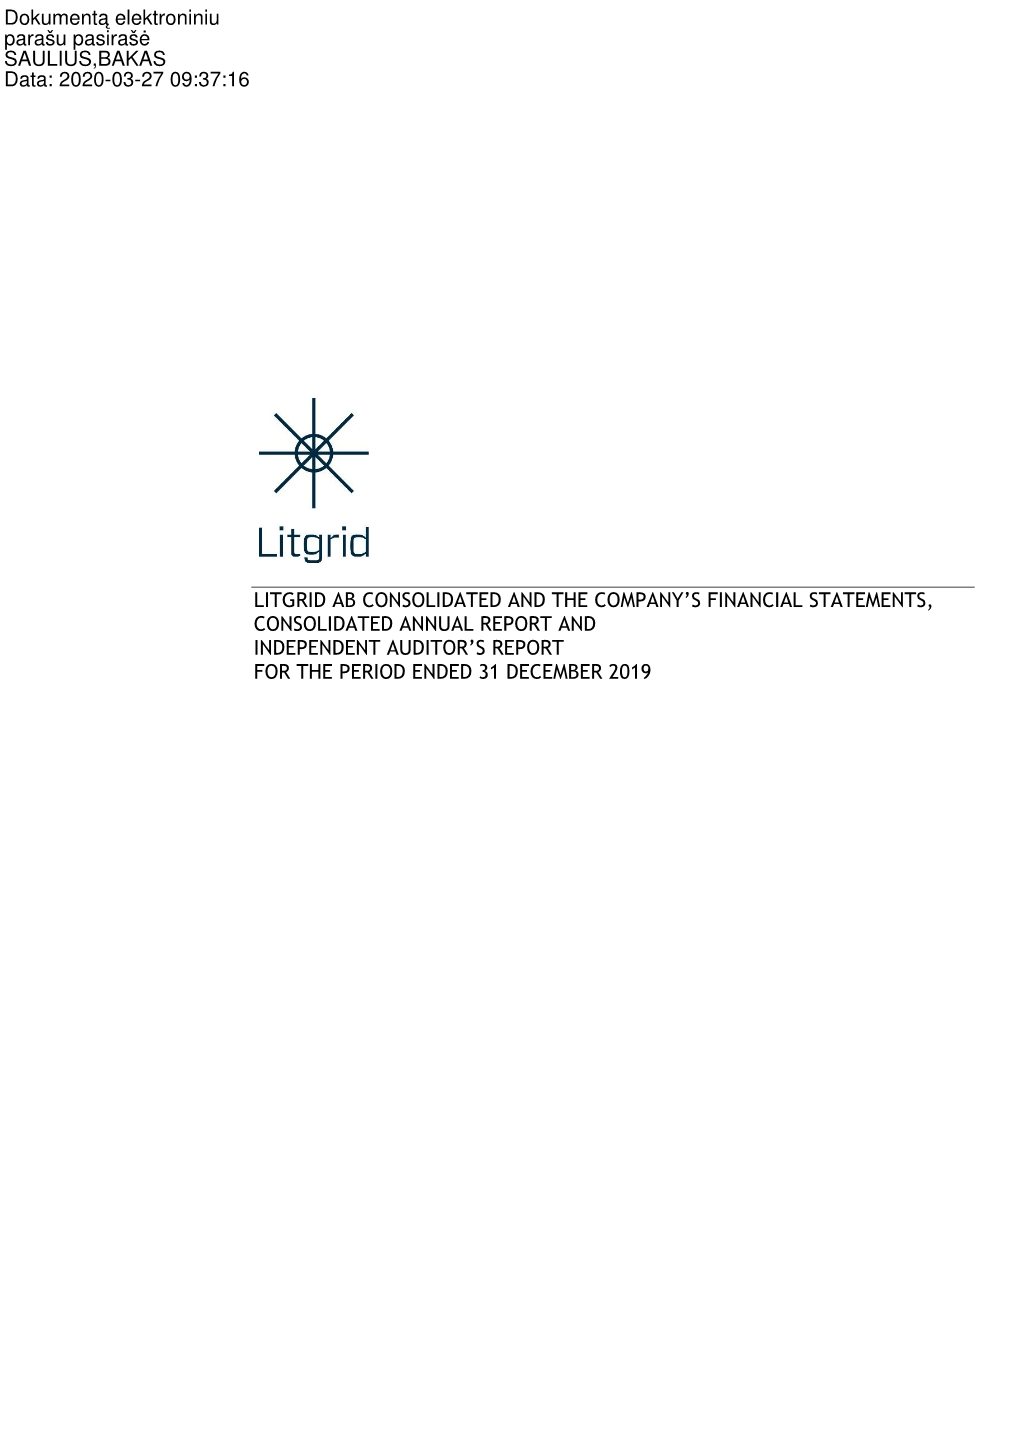 Litgrid Ab Consolidated and the Company's Financial